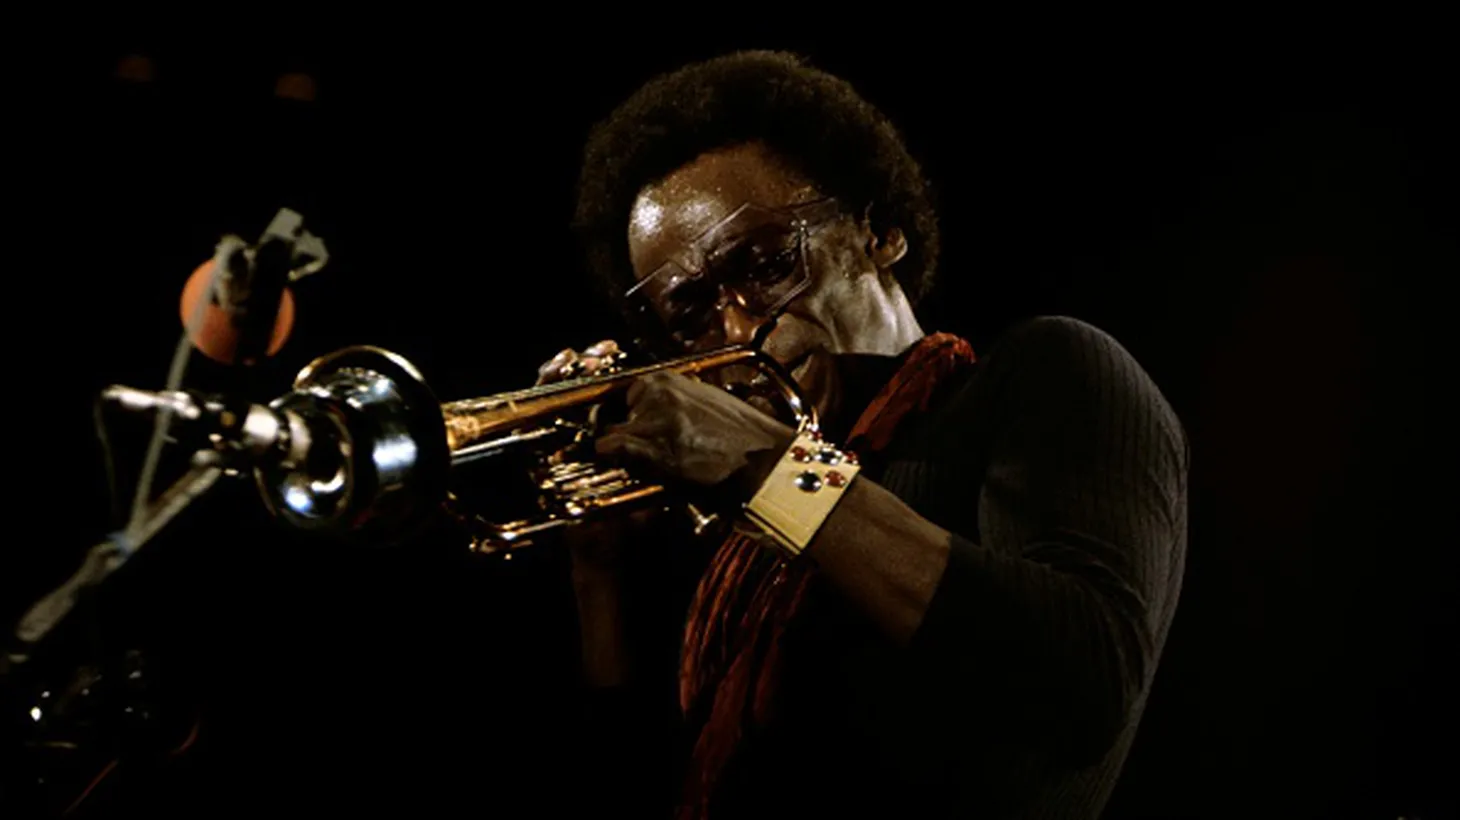 American jazz trumpeter and composer Miles Davis (1926-1991) performs live on stage in Berlin, West Germany in November 1973.